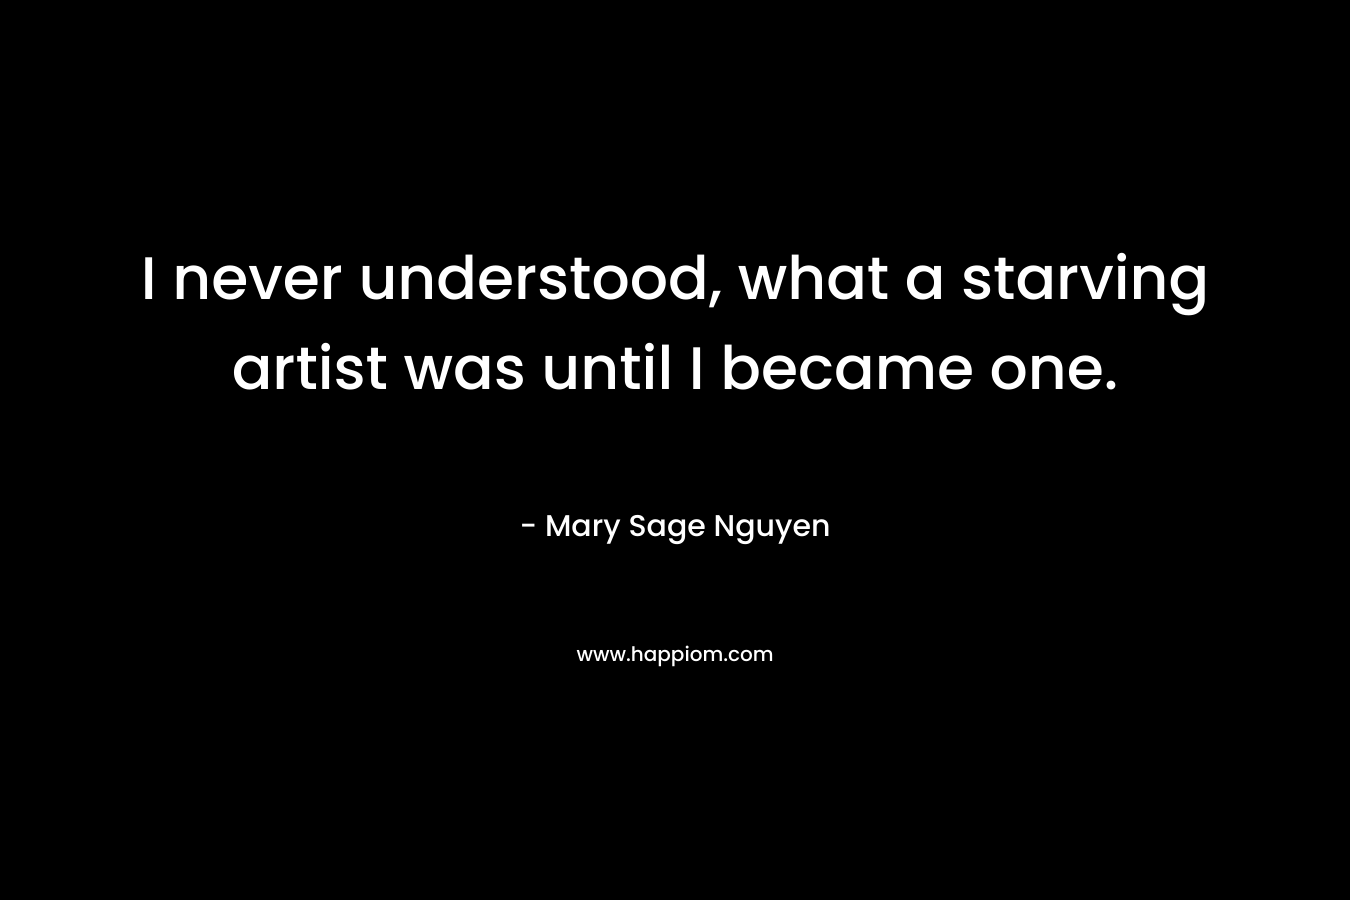 I never understood, what a starving artist was until I became one.